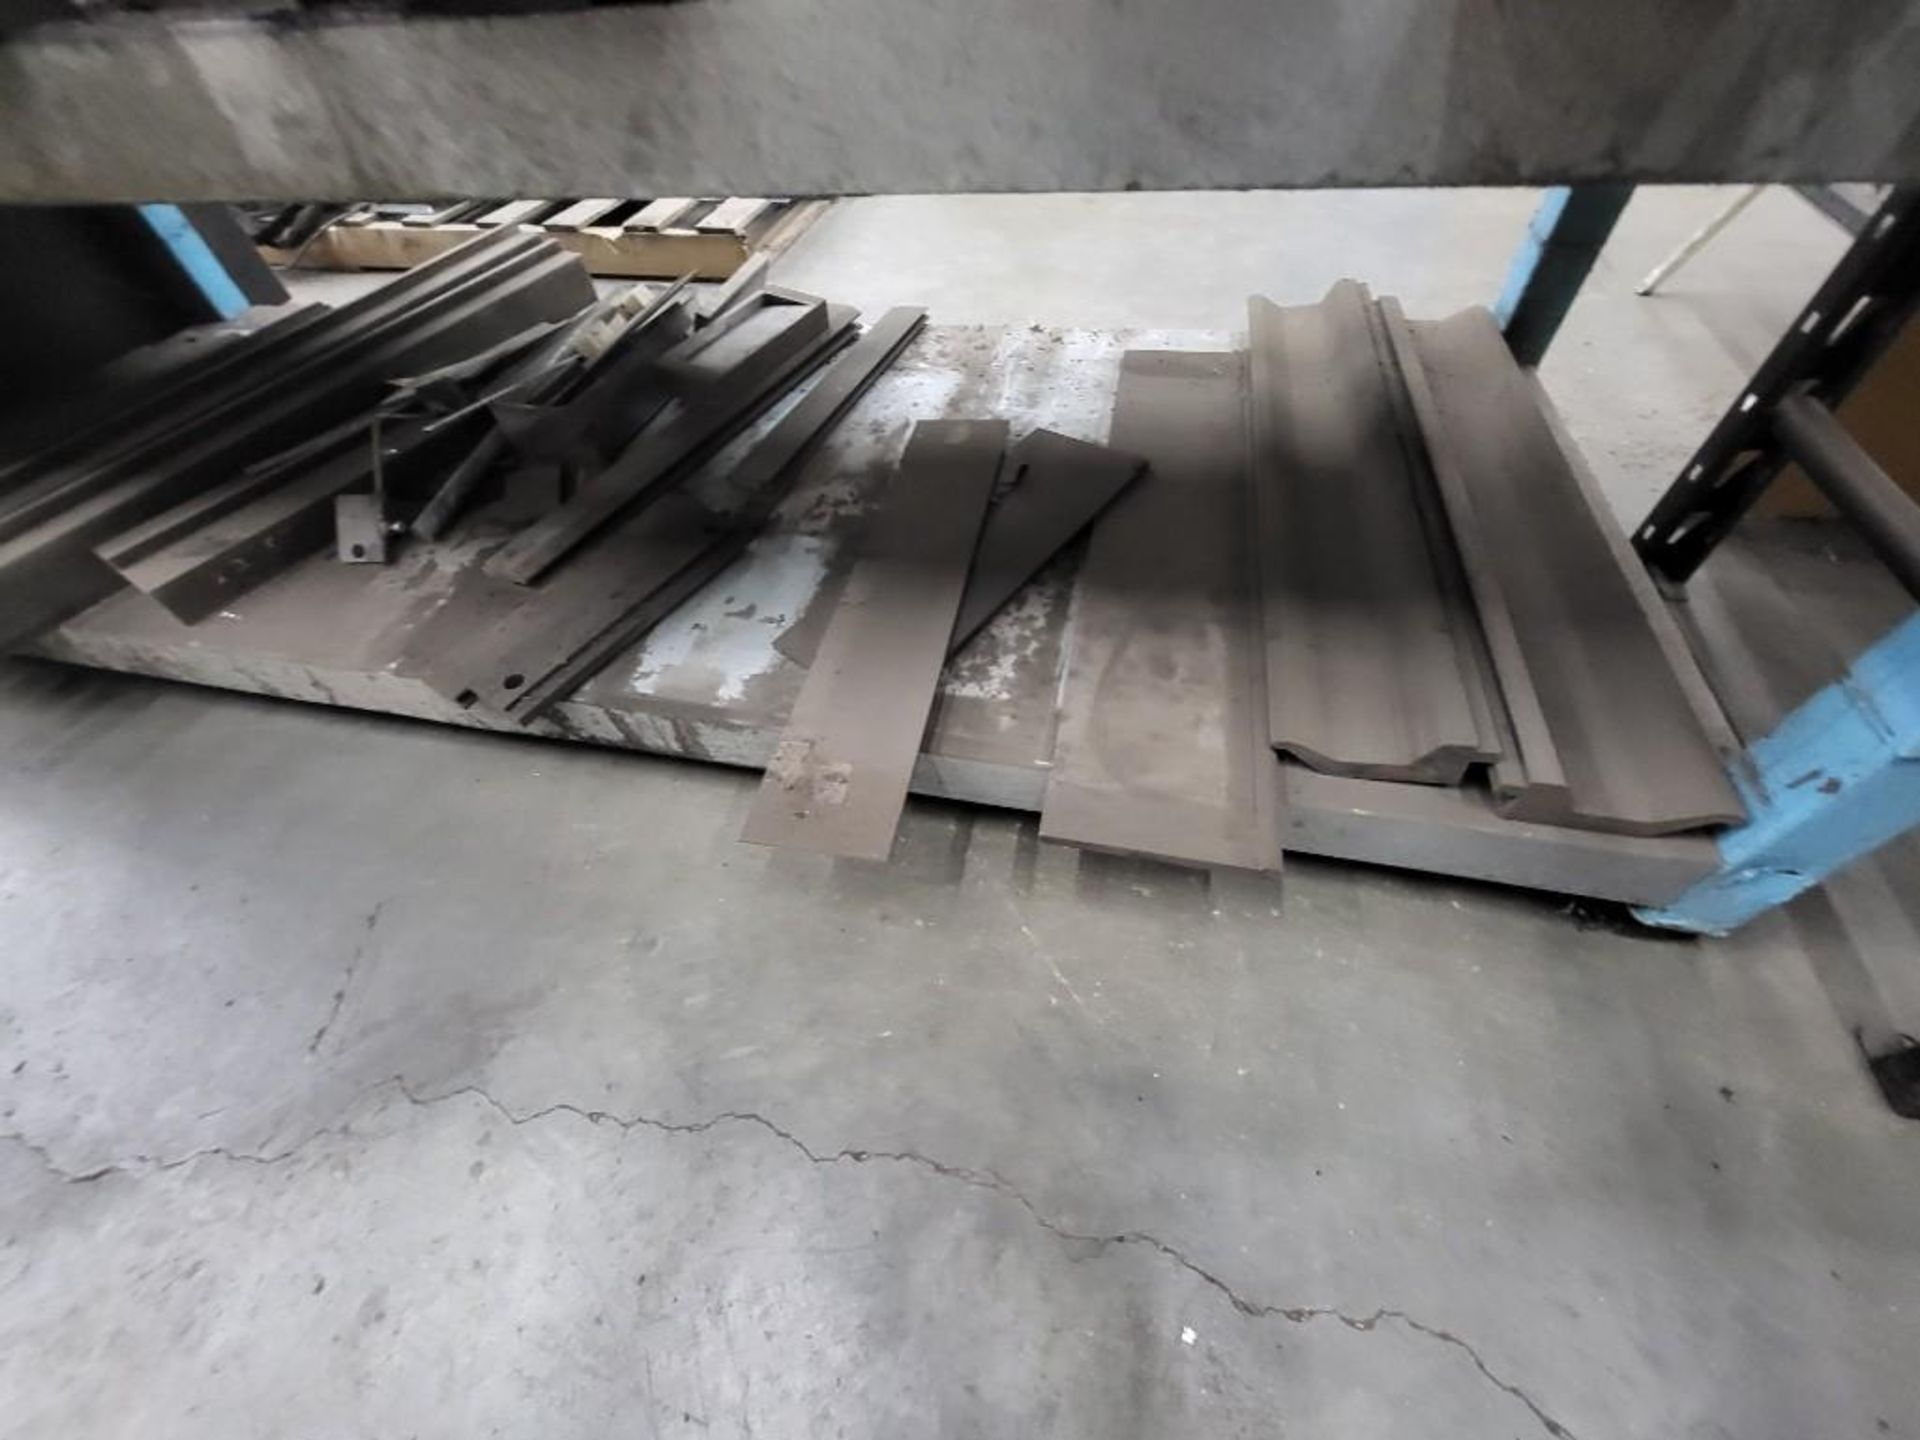 LOT OF PRESS BRAKE TOOLING WITH SHELF - Image 17 of 18